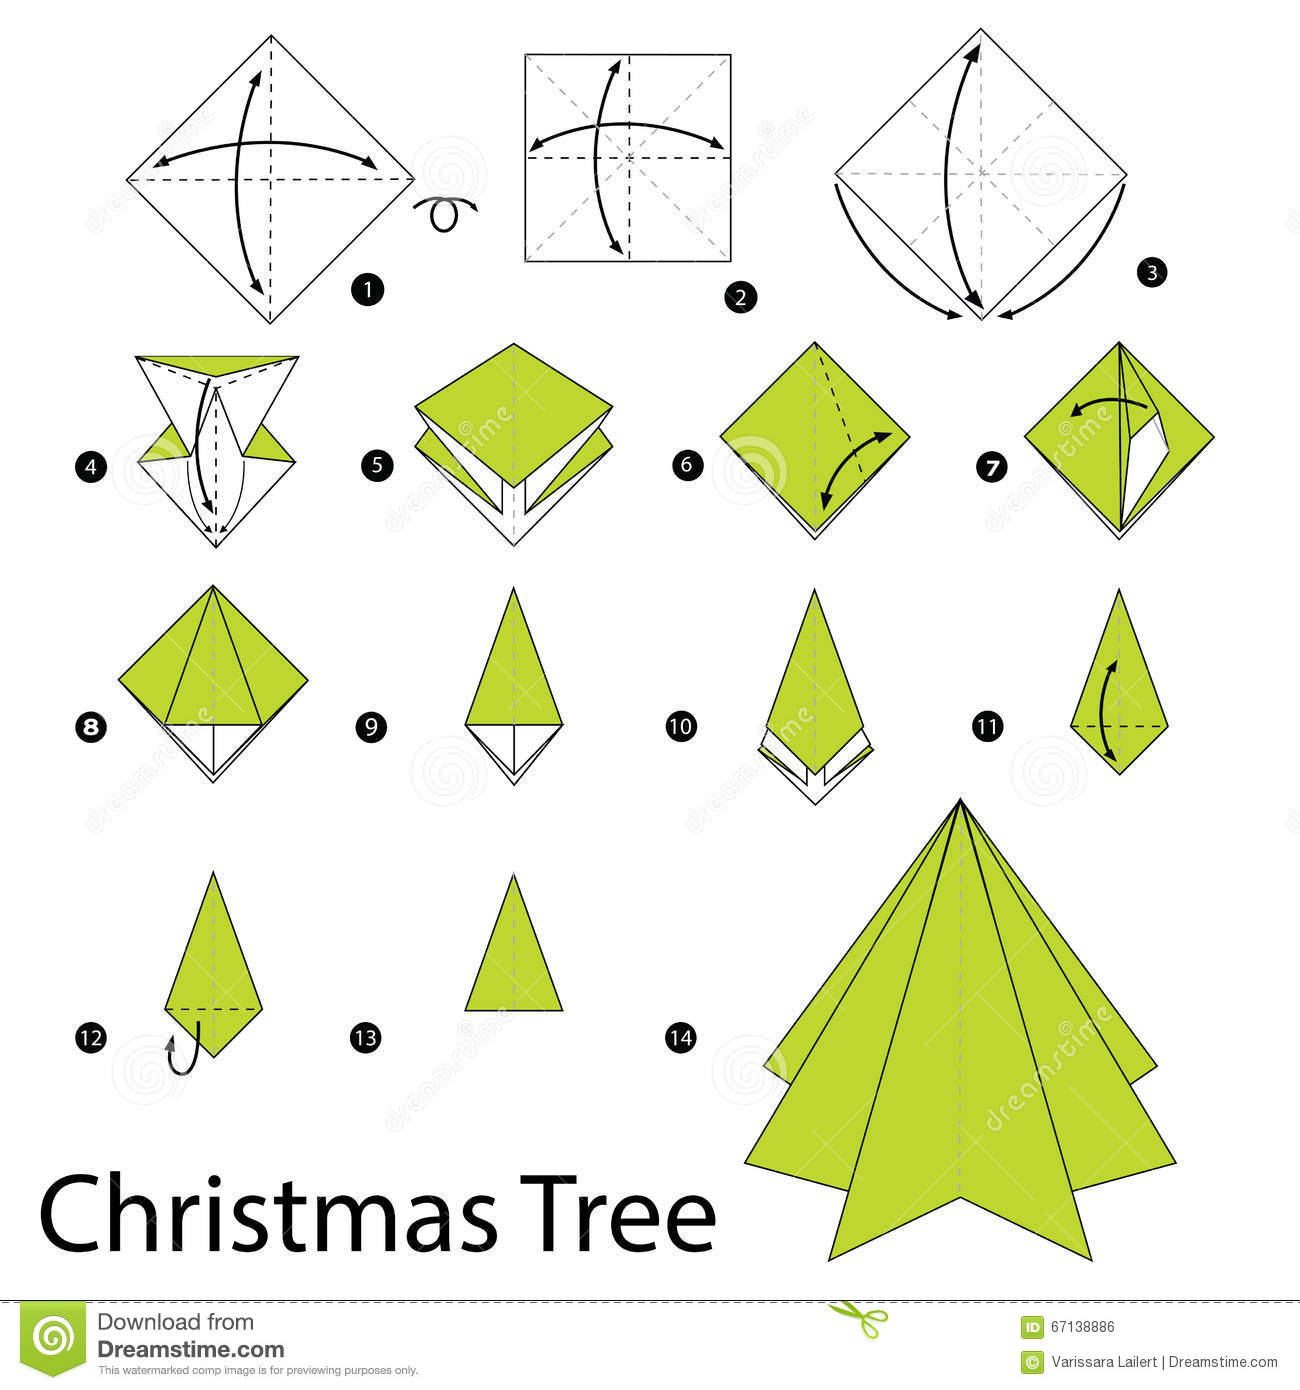 Easy Origami Christmas Ornaments Instructions Christmas Tree Christmas Tree Origami How To Make A Christmas Tree